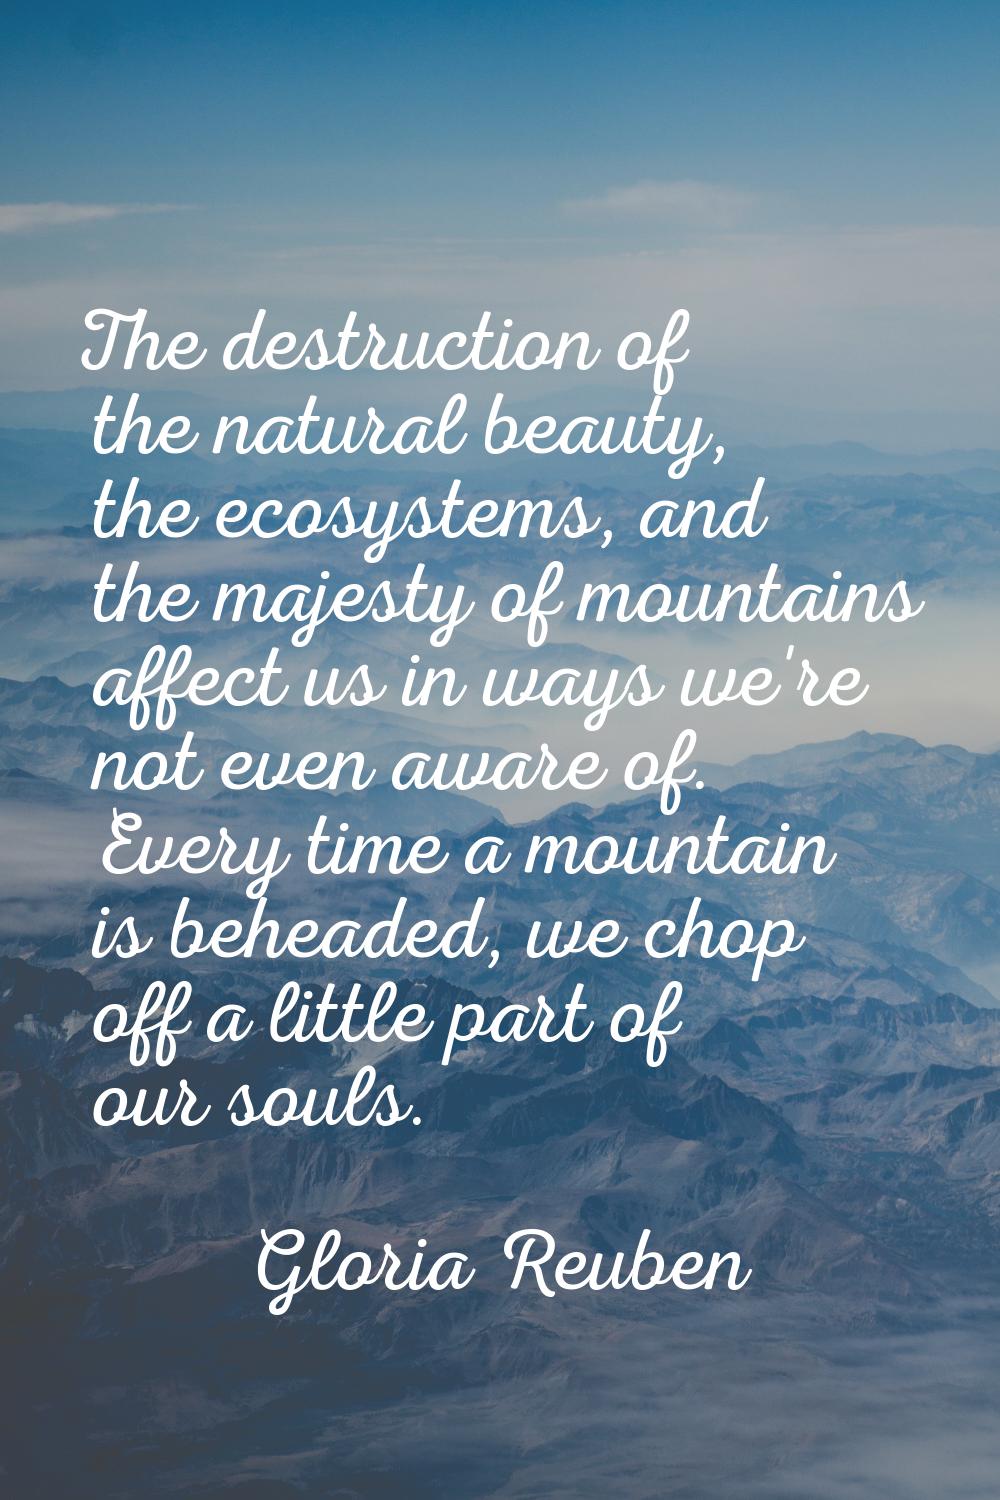 The destruction of the natural beauty, the ecosystems, and the majesty of mountains affect us in wa